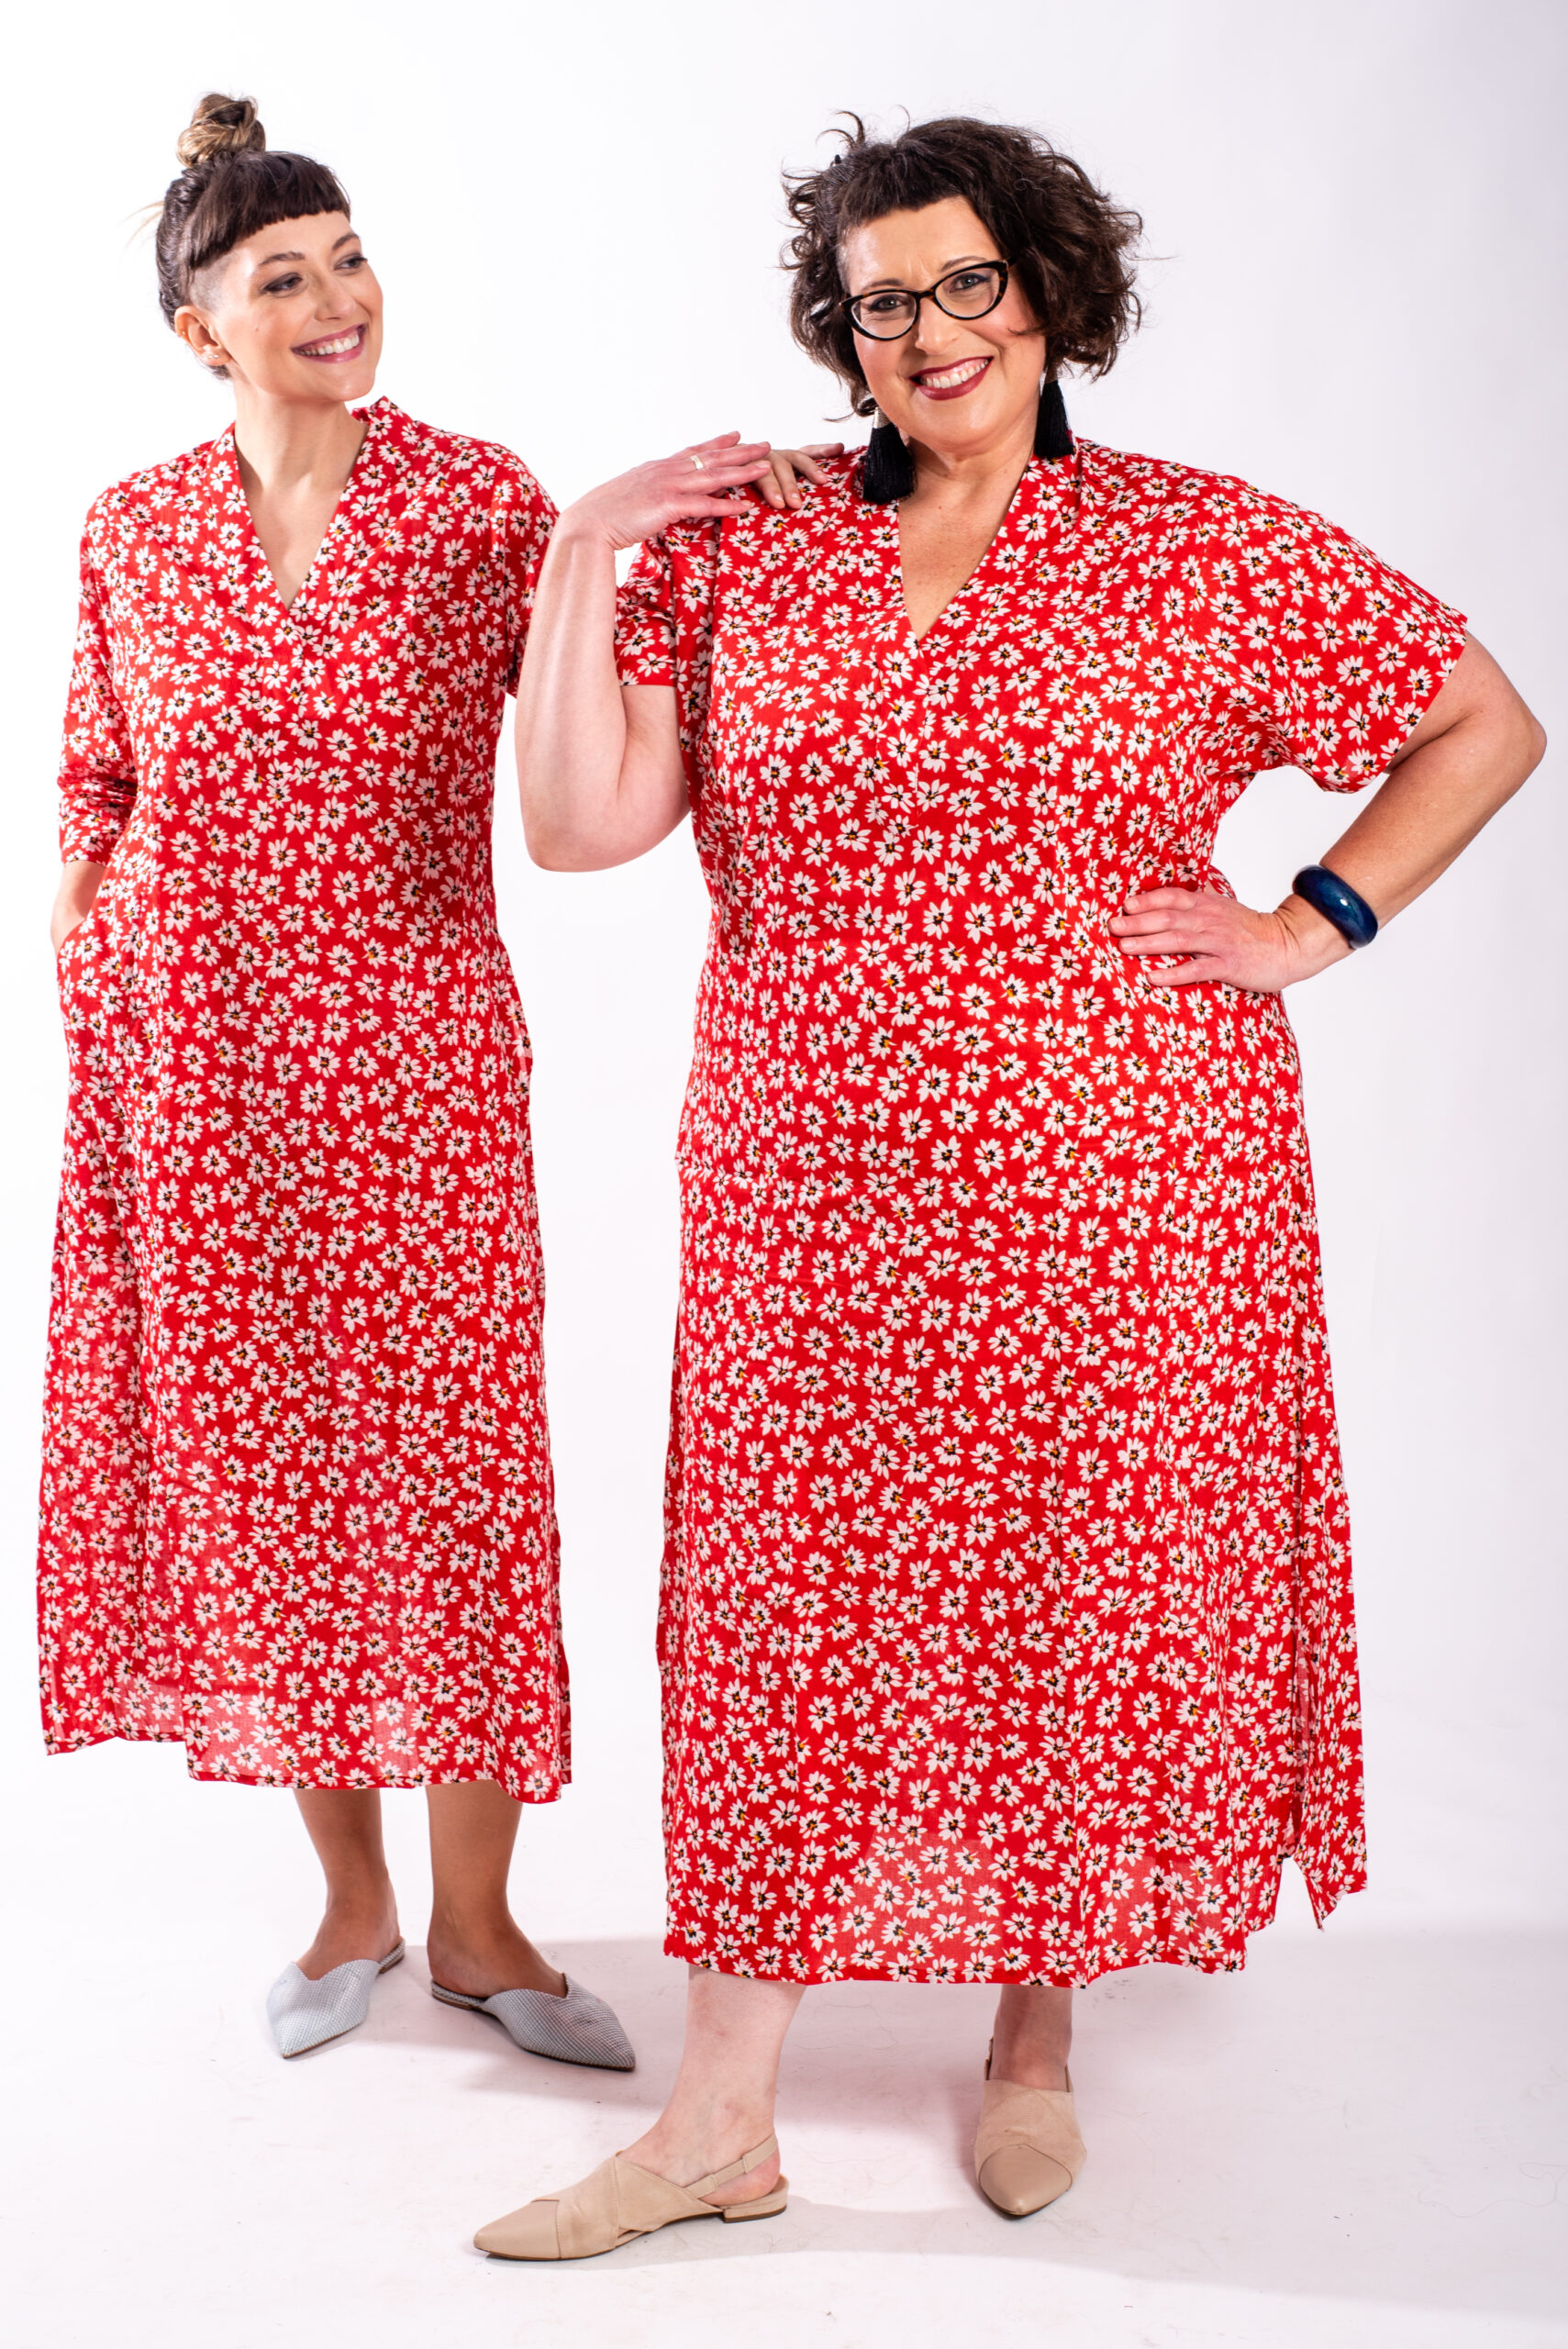 Jalabiya dress | Uniquely designed dress - Floral print on a red dress by comfort zone boutique